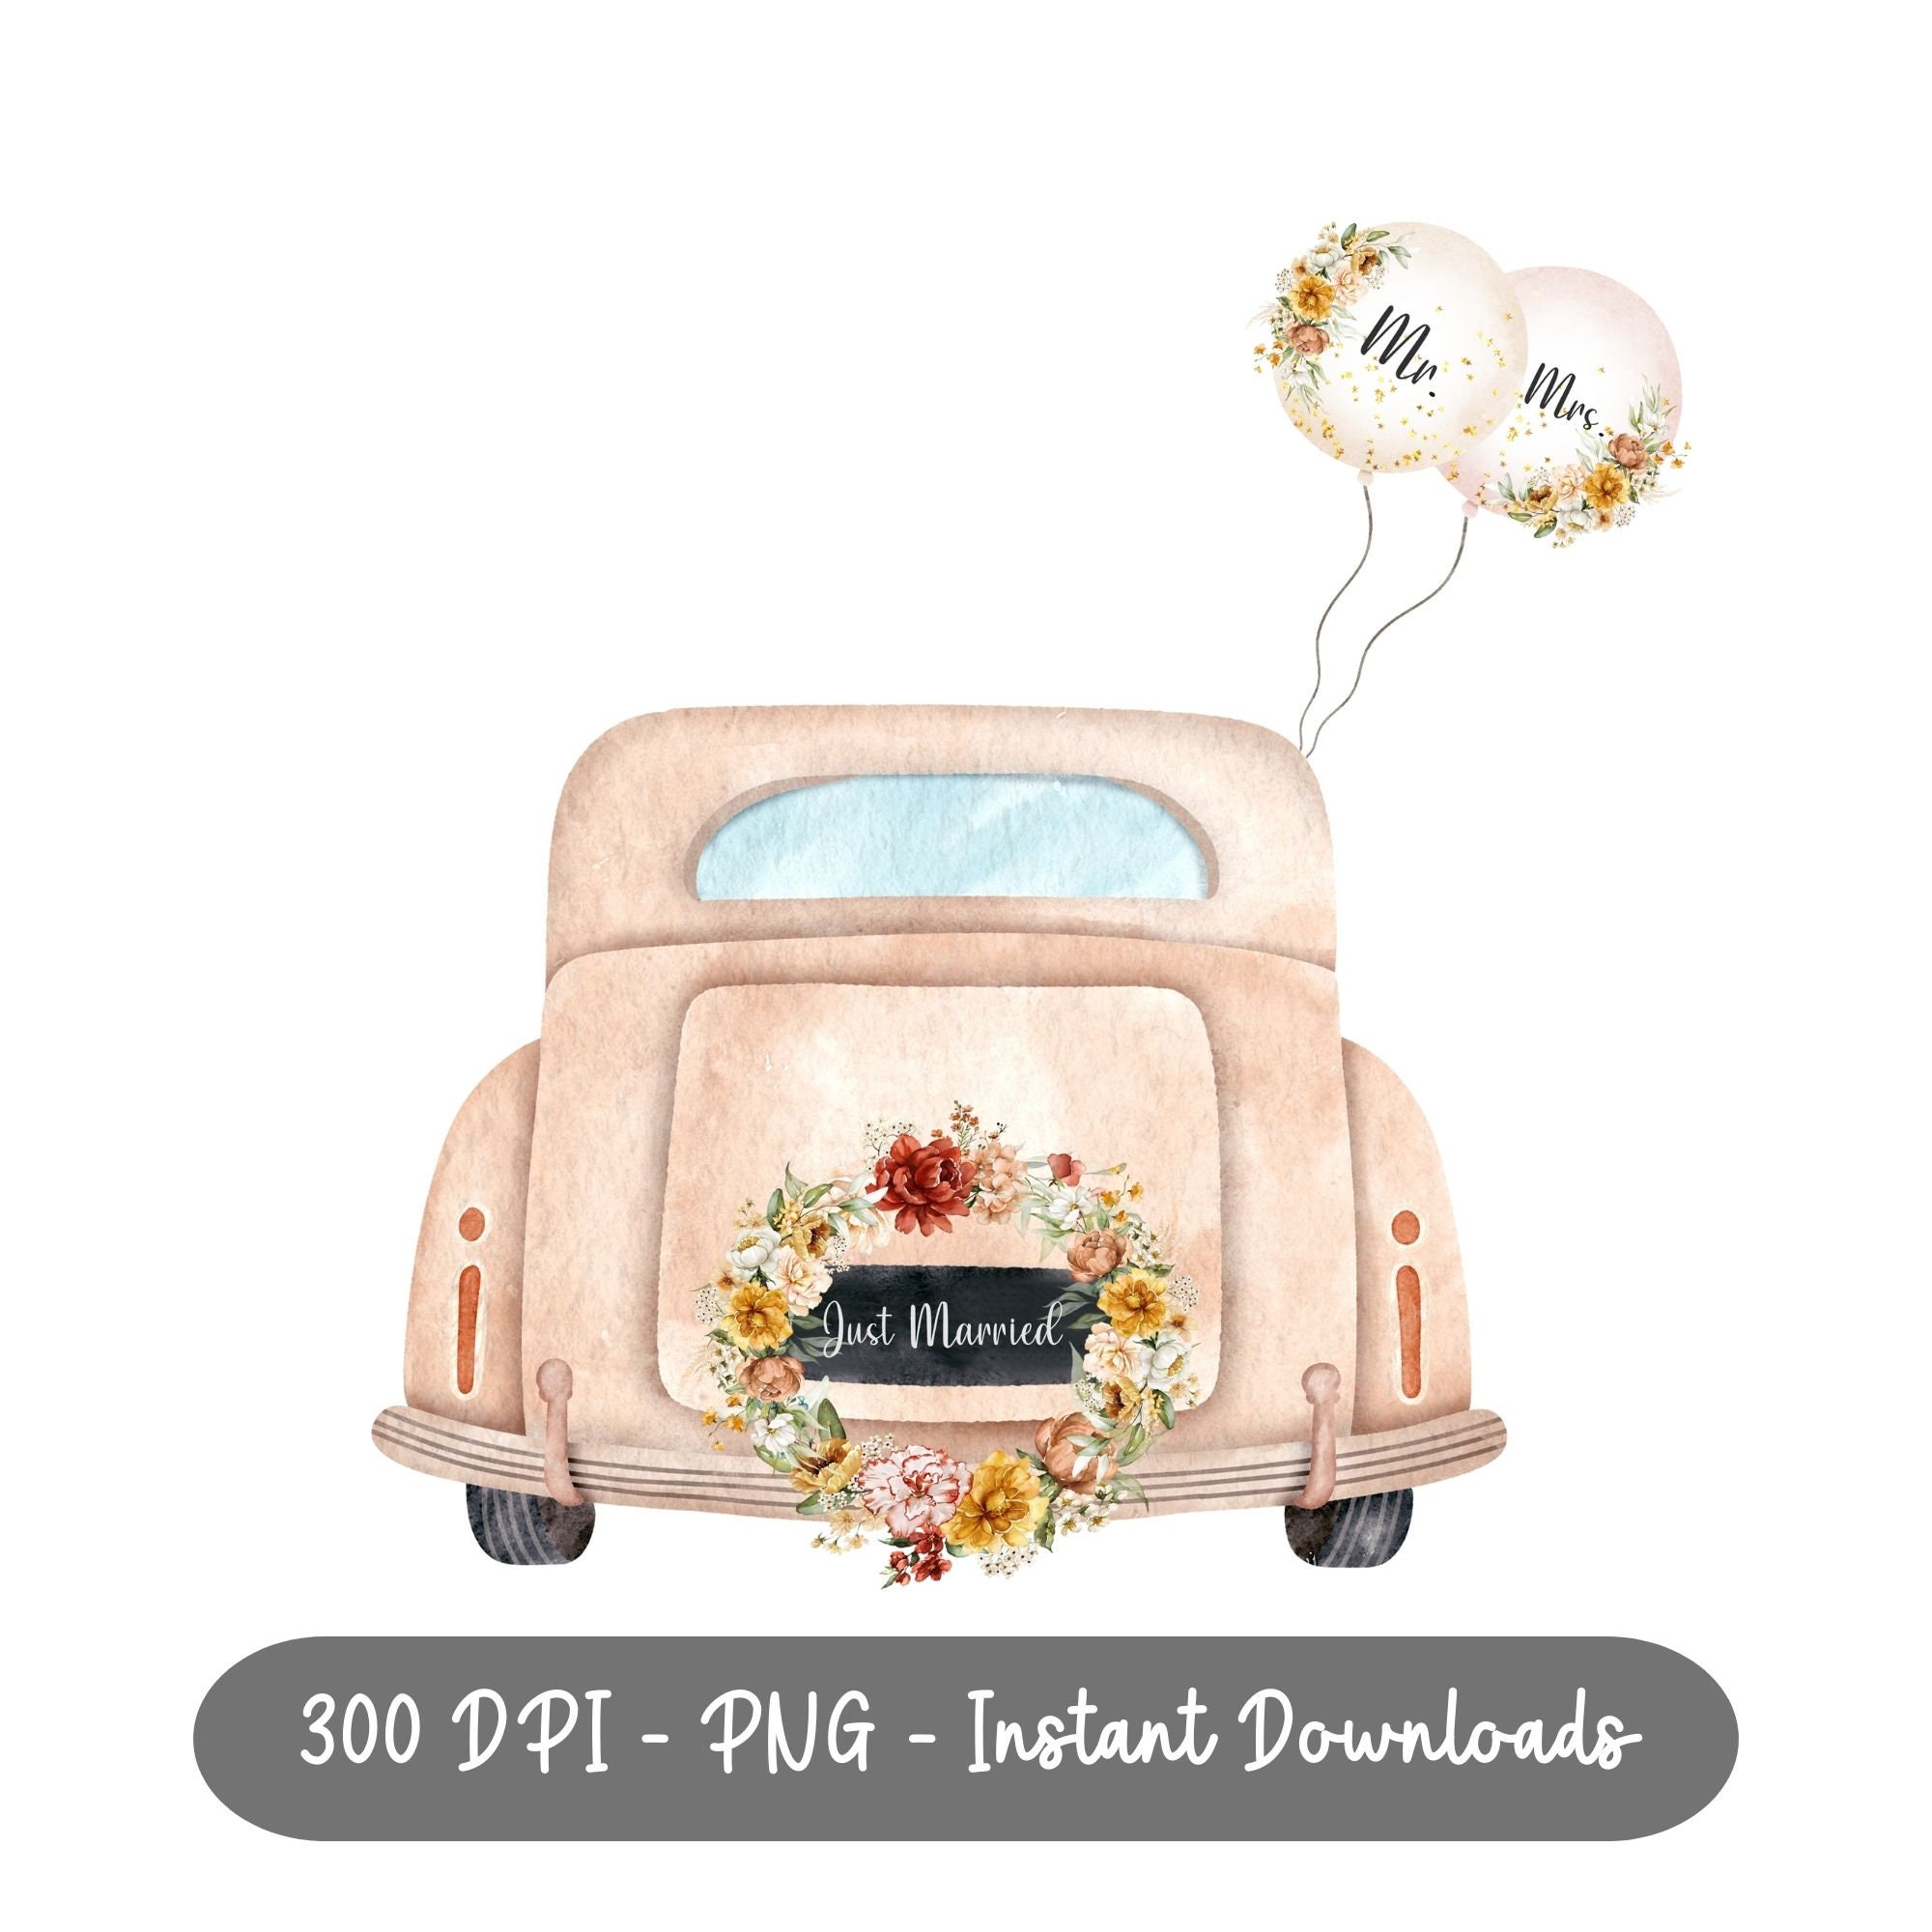 Just Married PNG, Just Married Car Prints, Mr & Mrs Watercolour Clipart,  Wedding Sublimation Designs, Congratulations Card Design, Download 